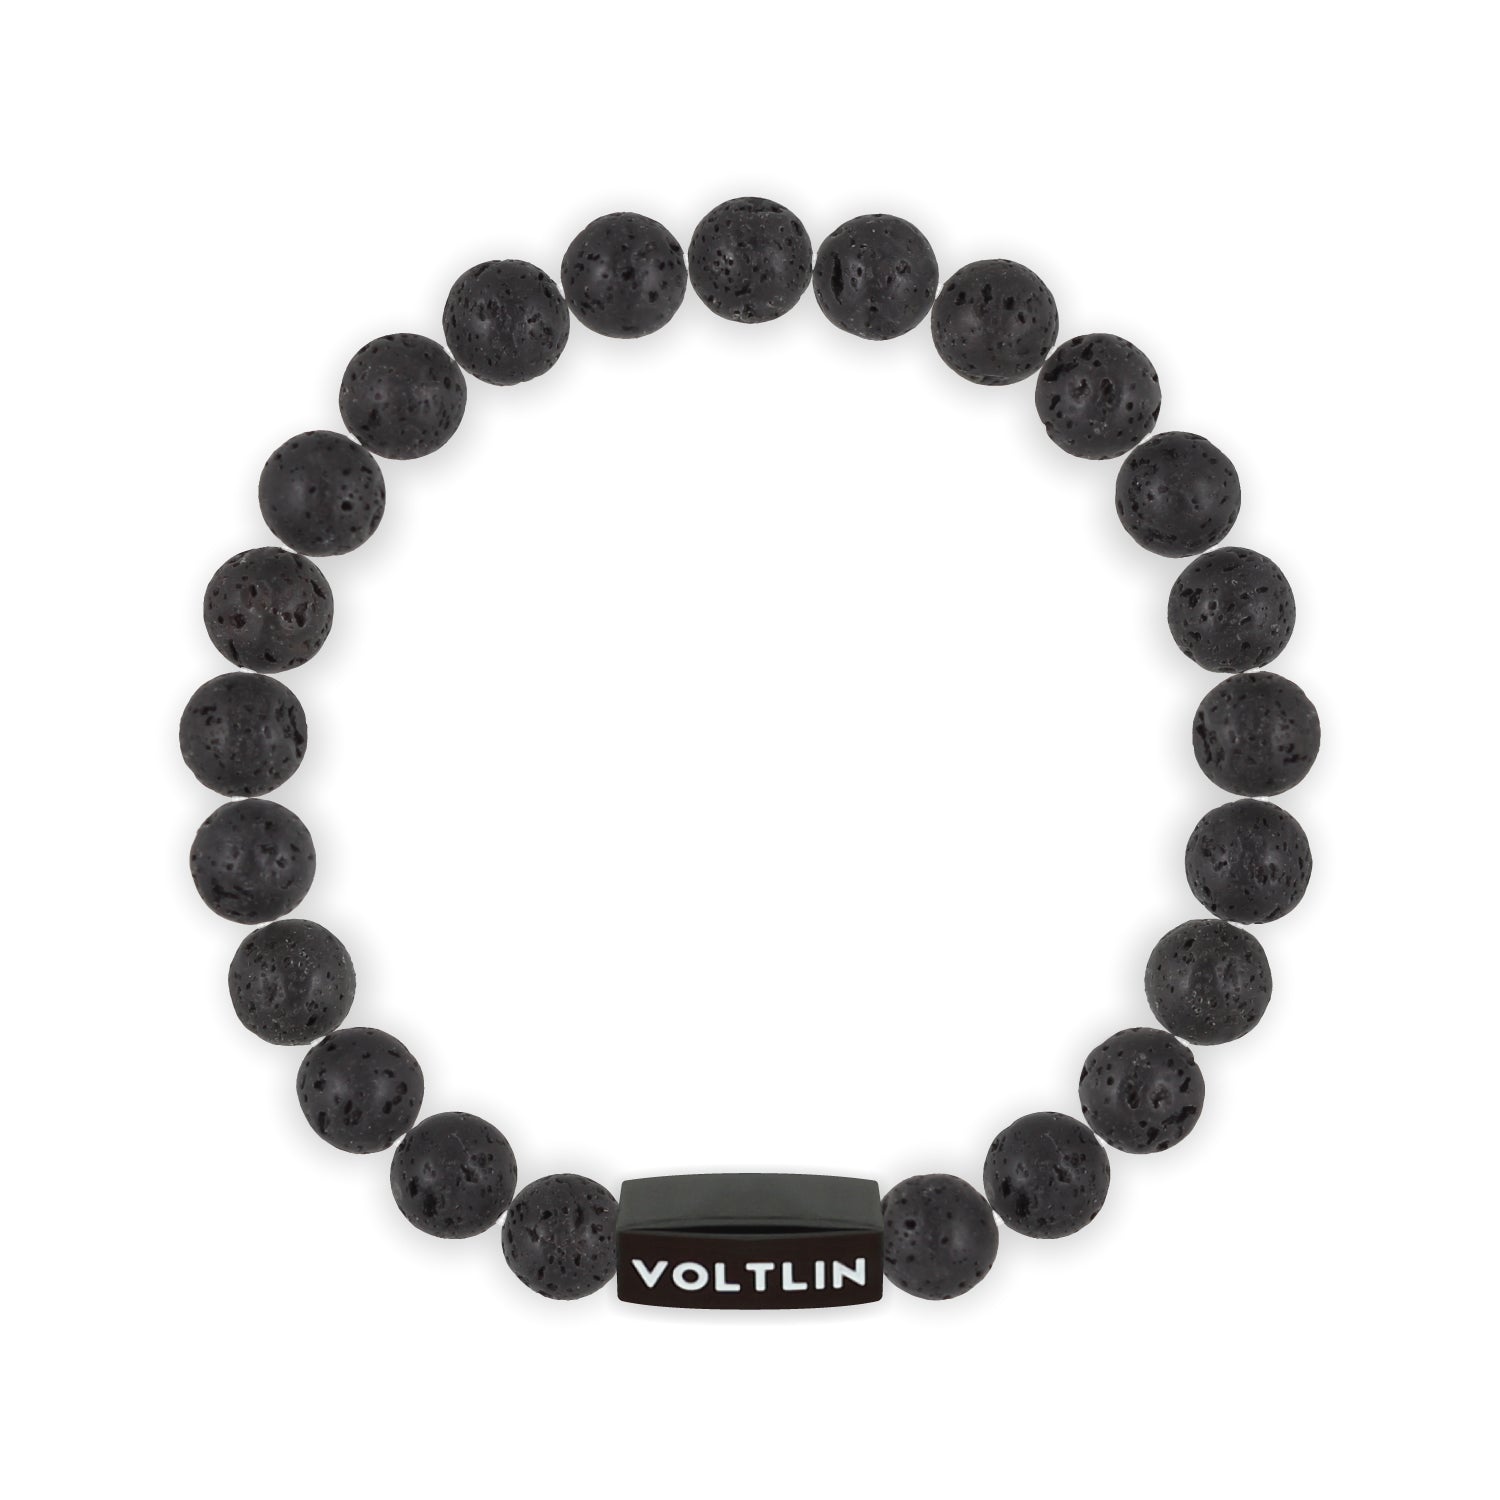 Front view of an 8mm Lava Stone crystal beaded stretch bracelet with black stainless steel logo bead made by Voltlin